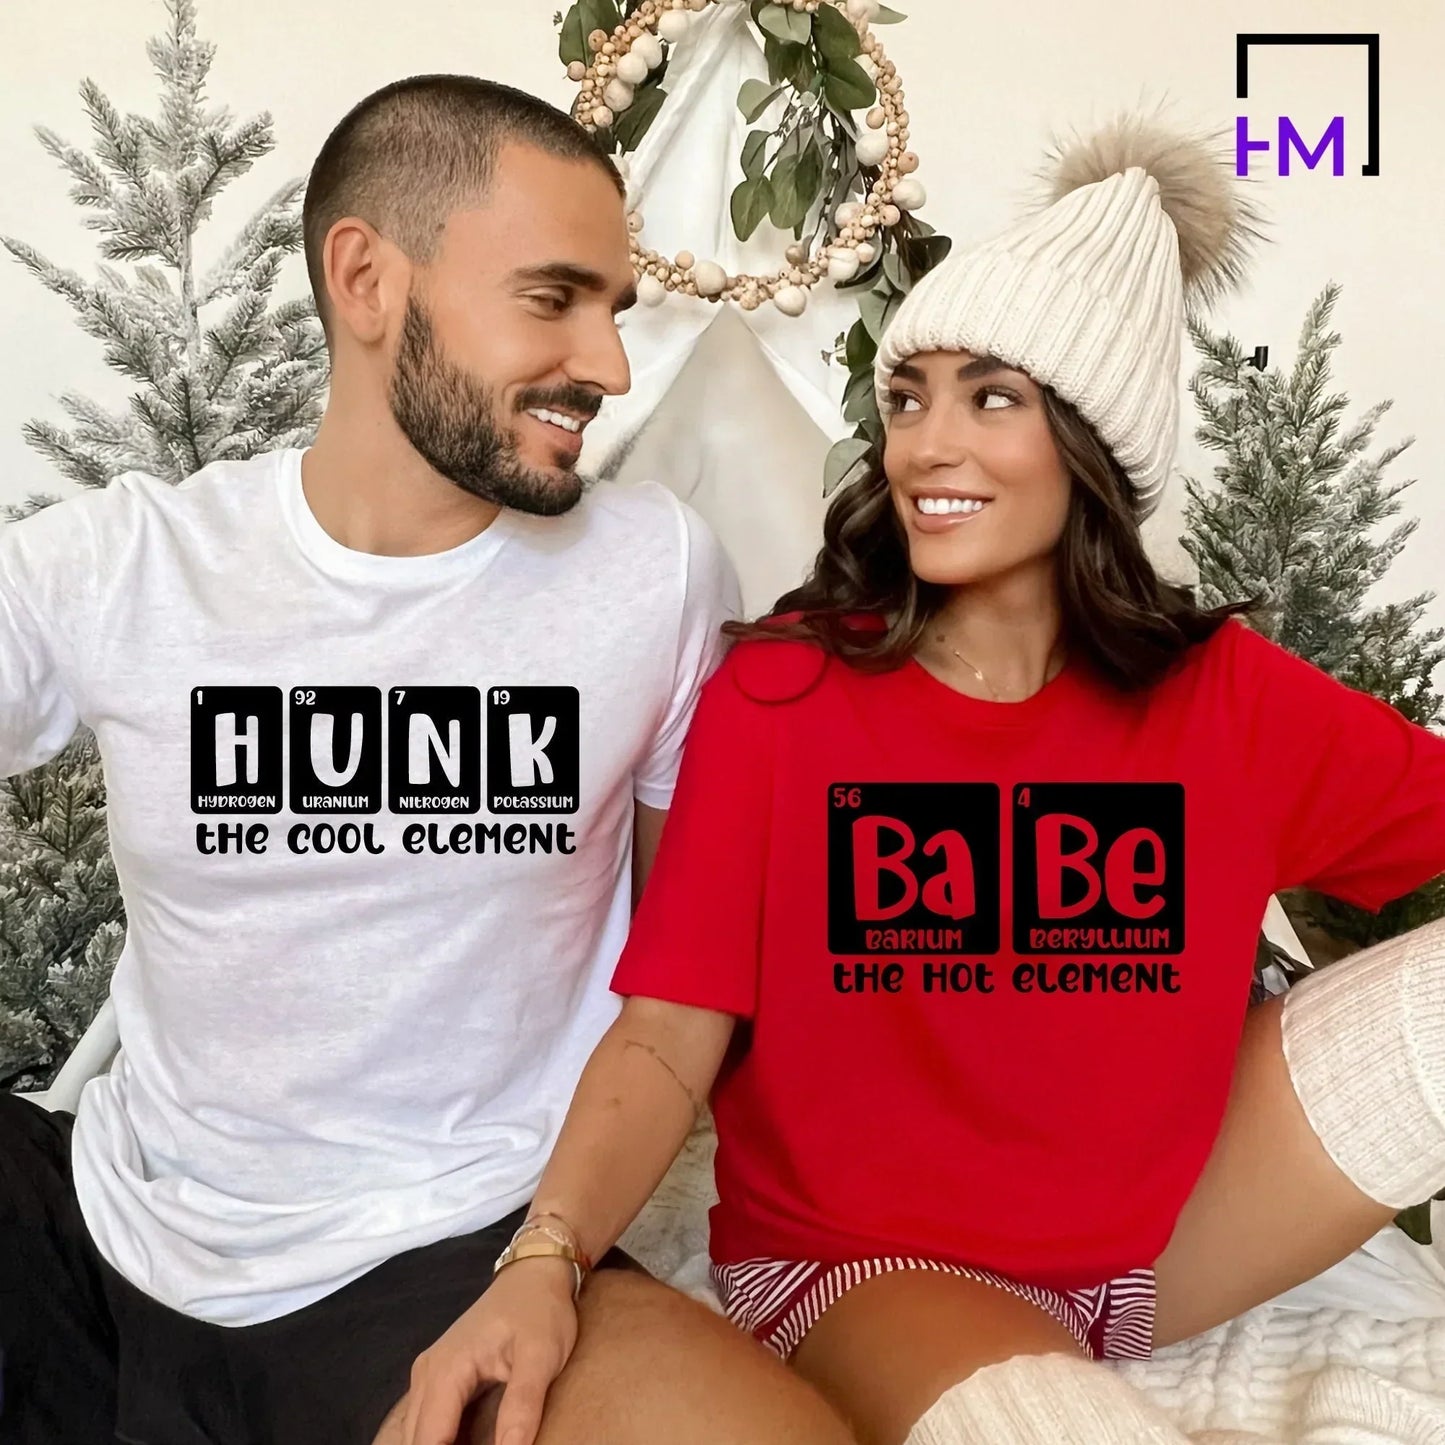 Funny Couples Shirts, Sexy Science Lover Gift for boyfriend, Husband, Engagement Announcement, Cute Couples Sweater/Hoodie, Wedding Present HMDesignStudioUS